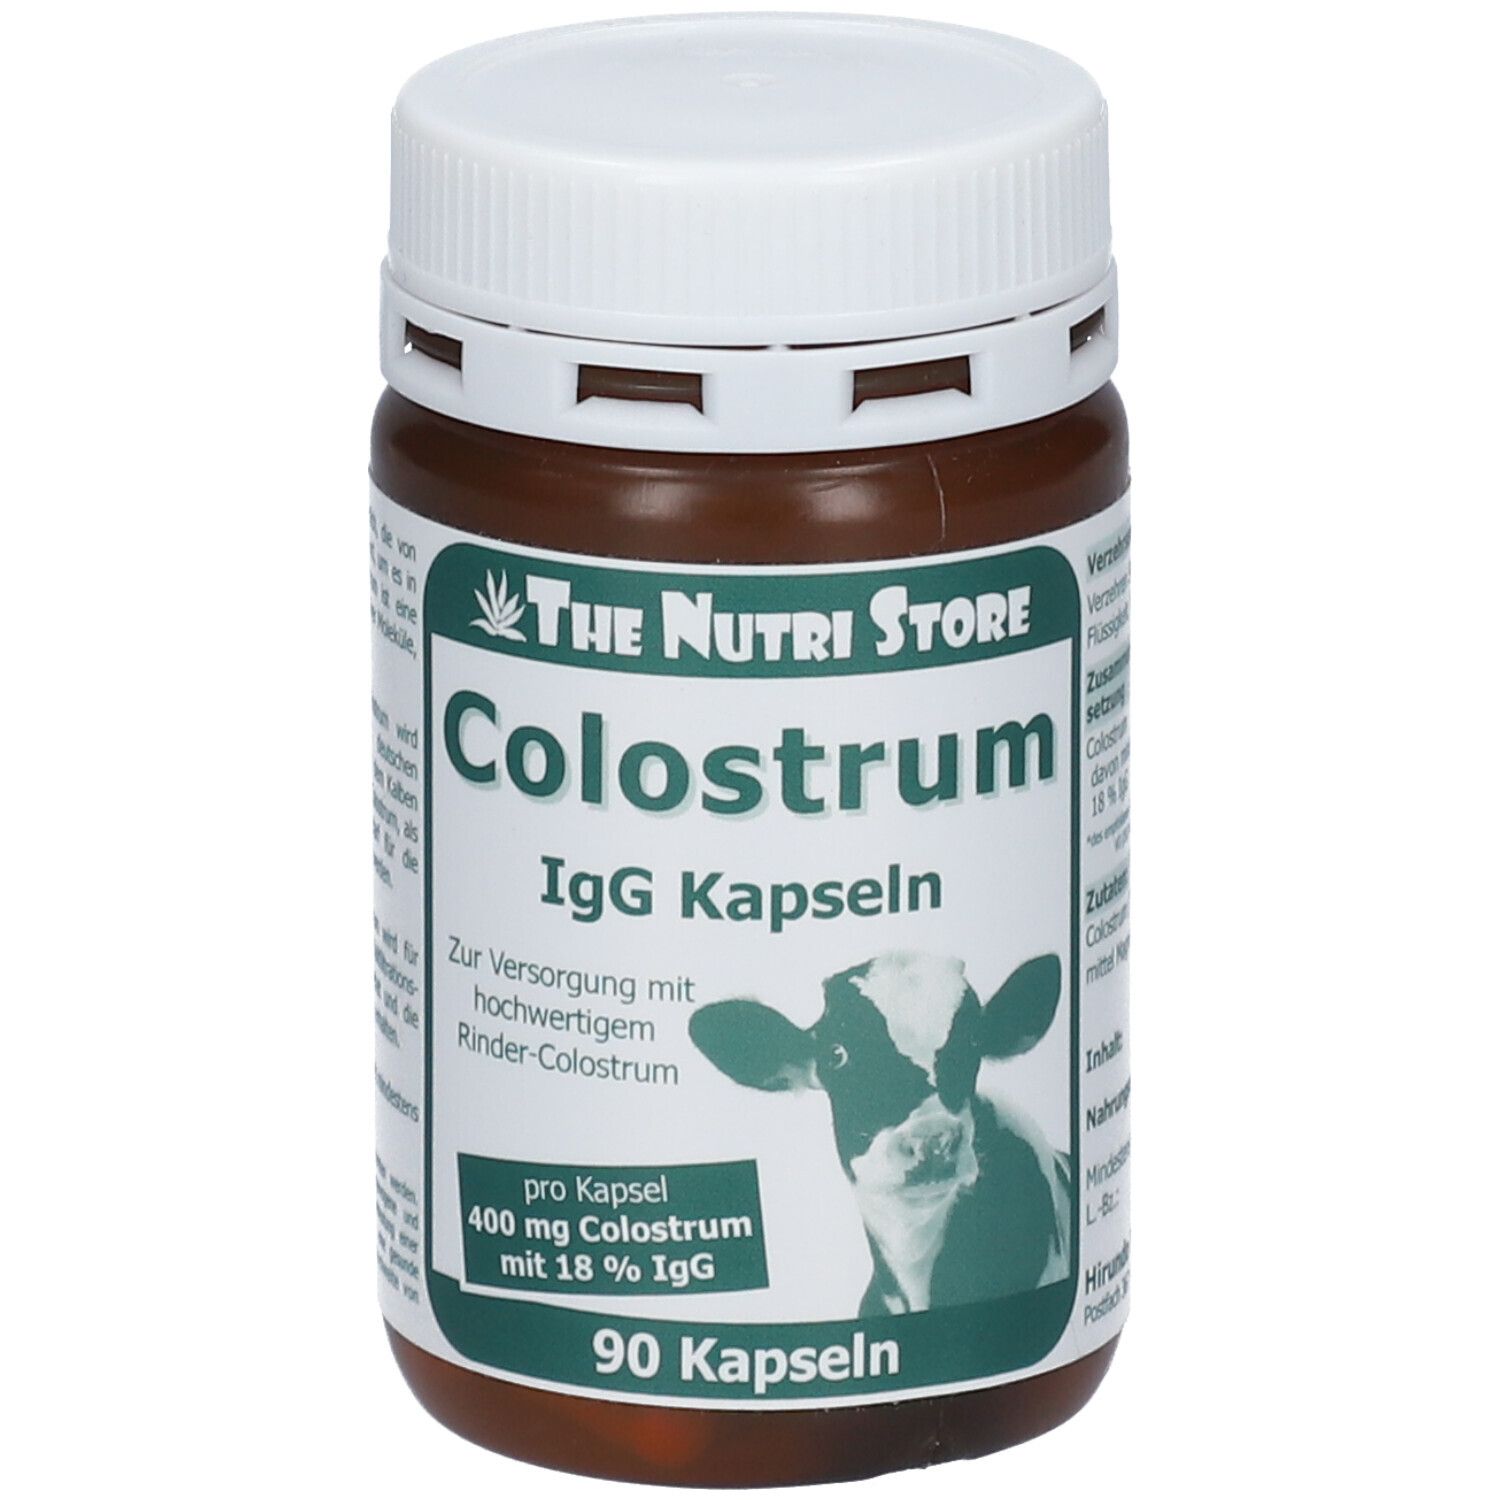 The Nutri Store Colostrum 400 mg